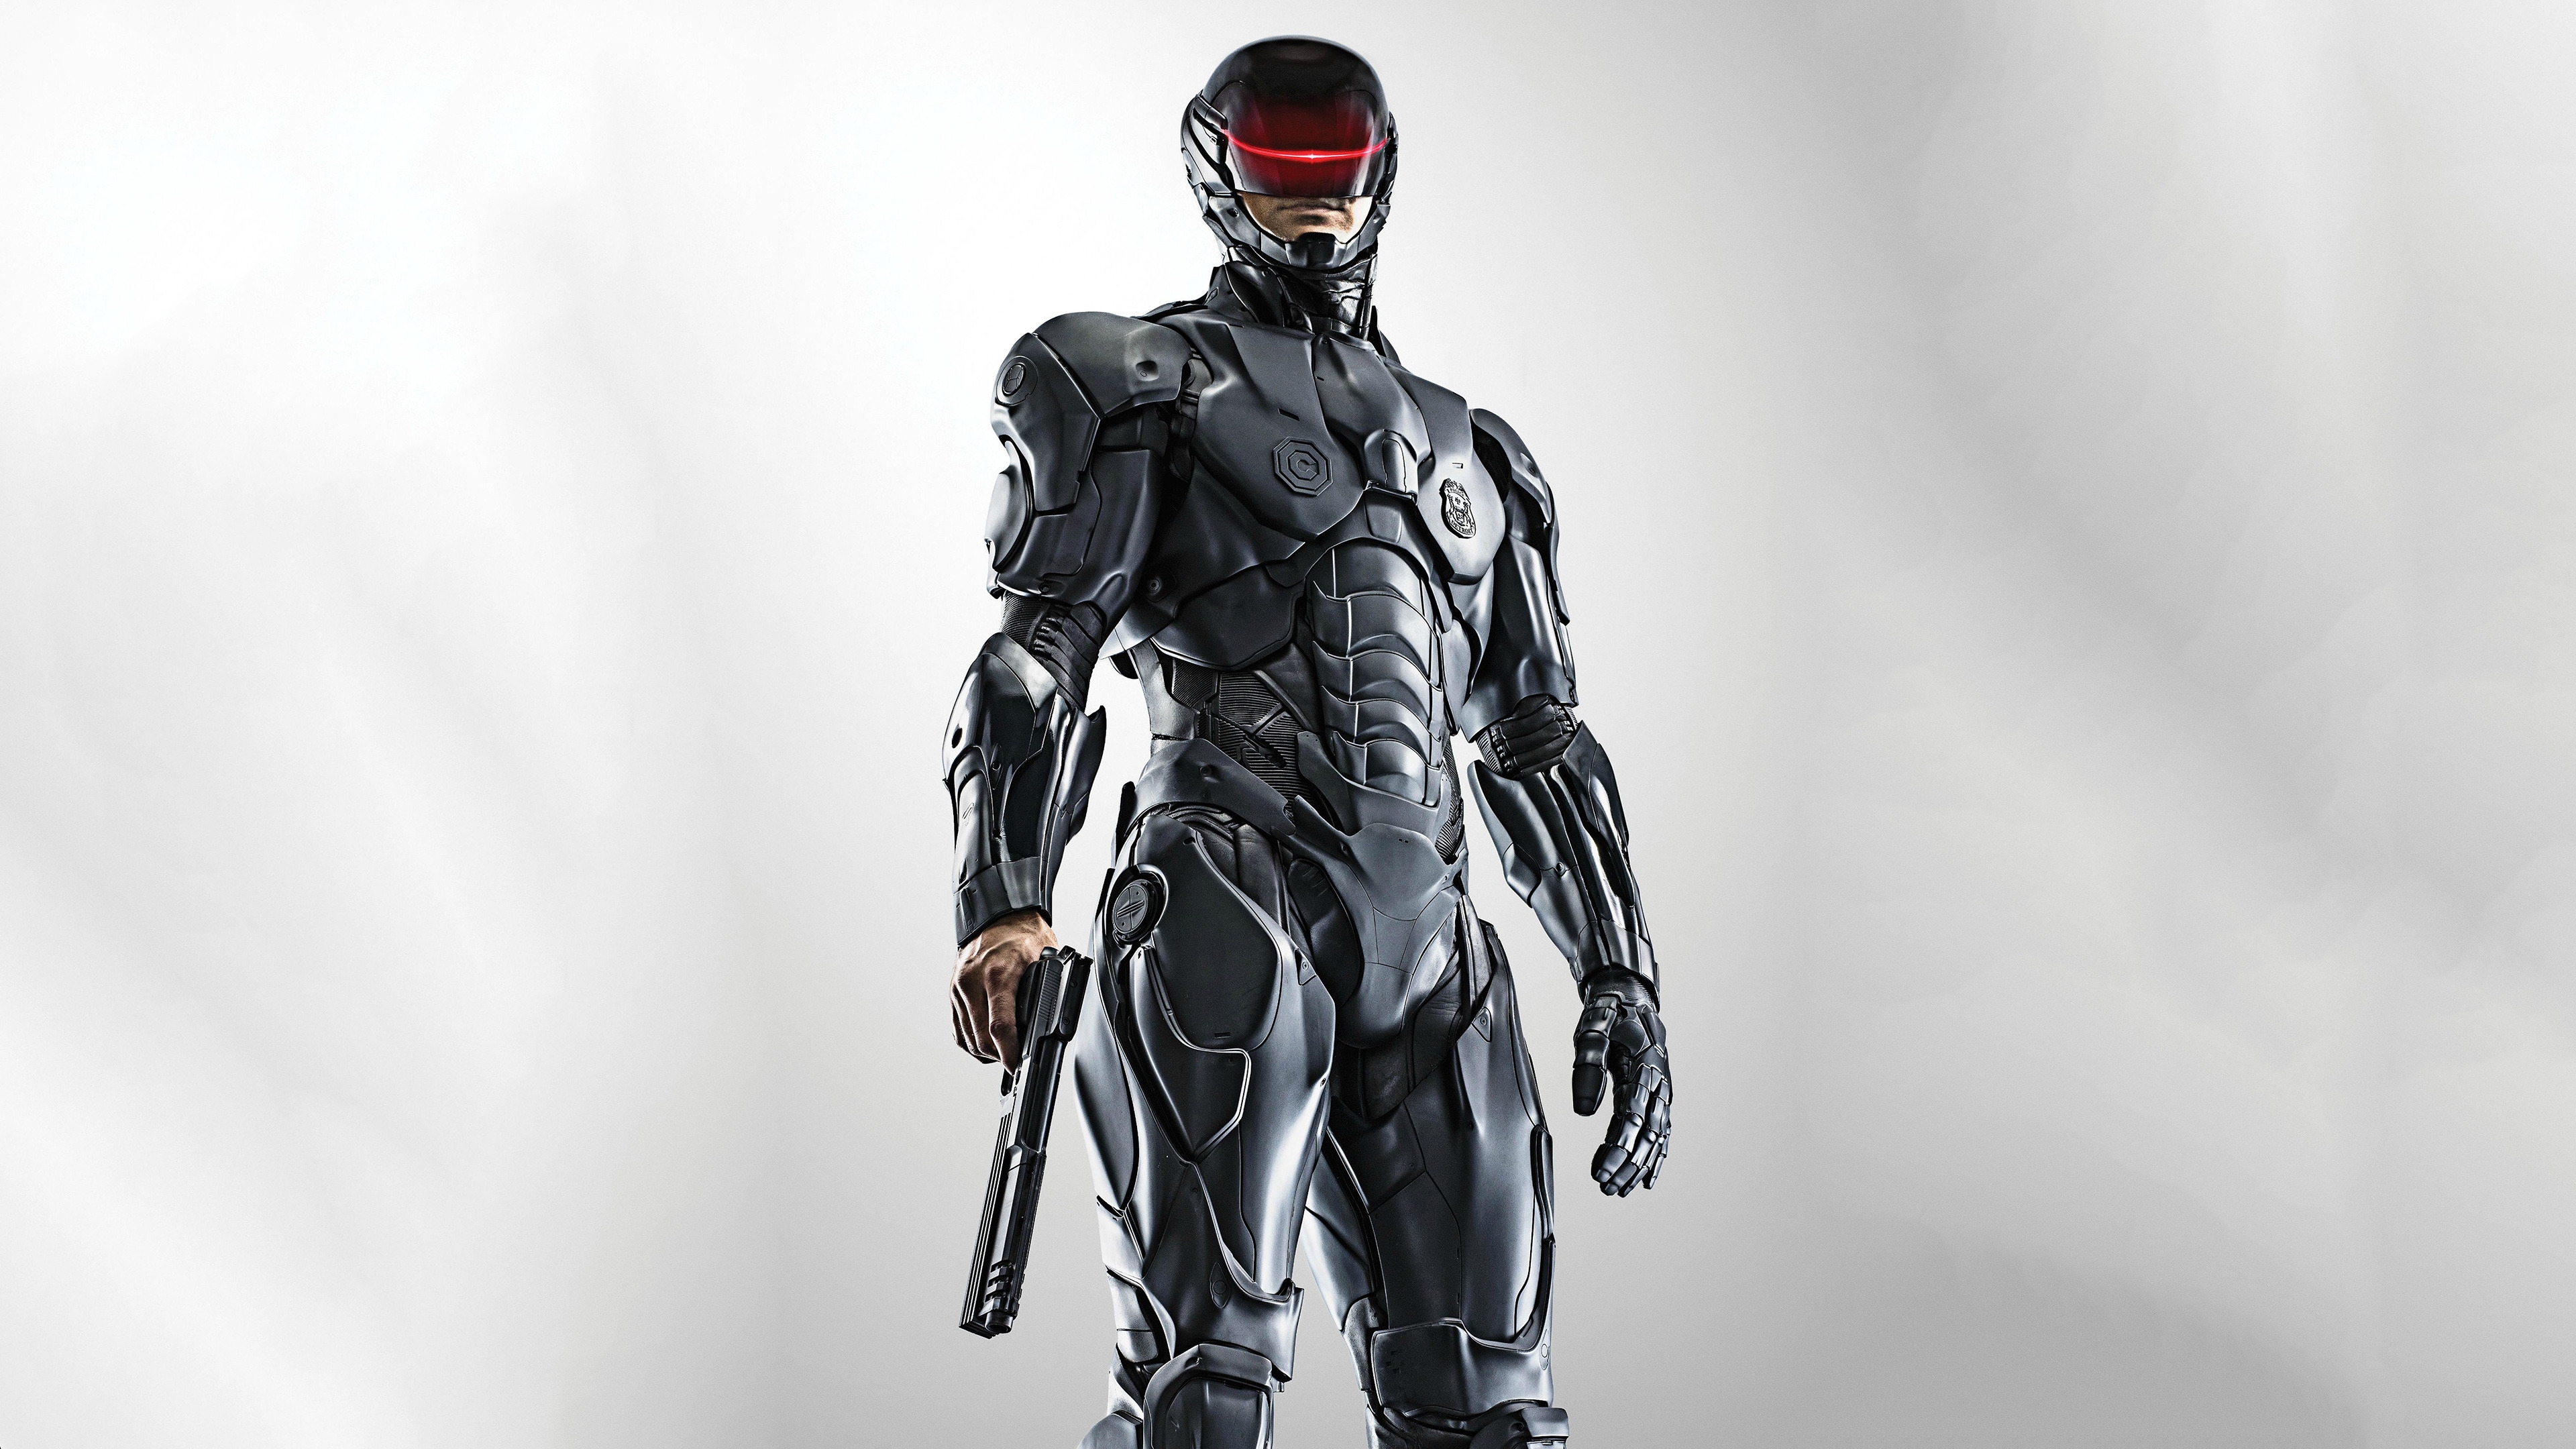 Robocop 2014 Poster for 3840 x 2160 Ultra HD resolution